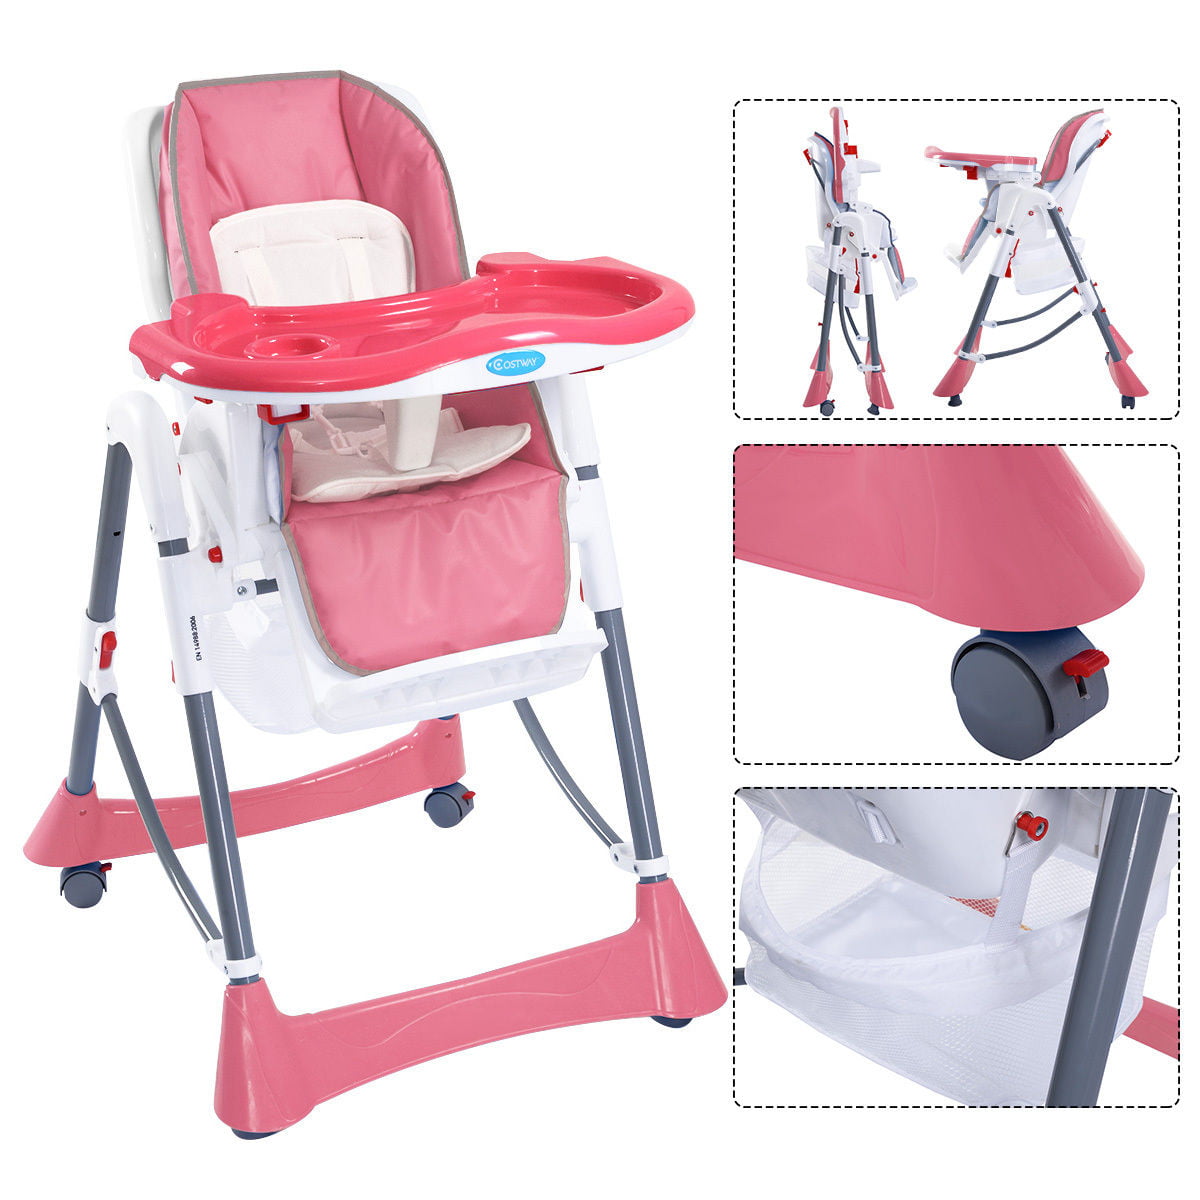 Baby Girl High Chair Infant Dining Seat Feeding Pink Floral Folding Portable New 